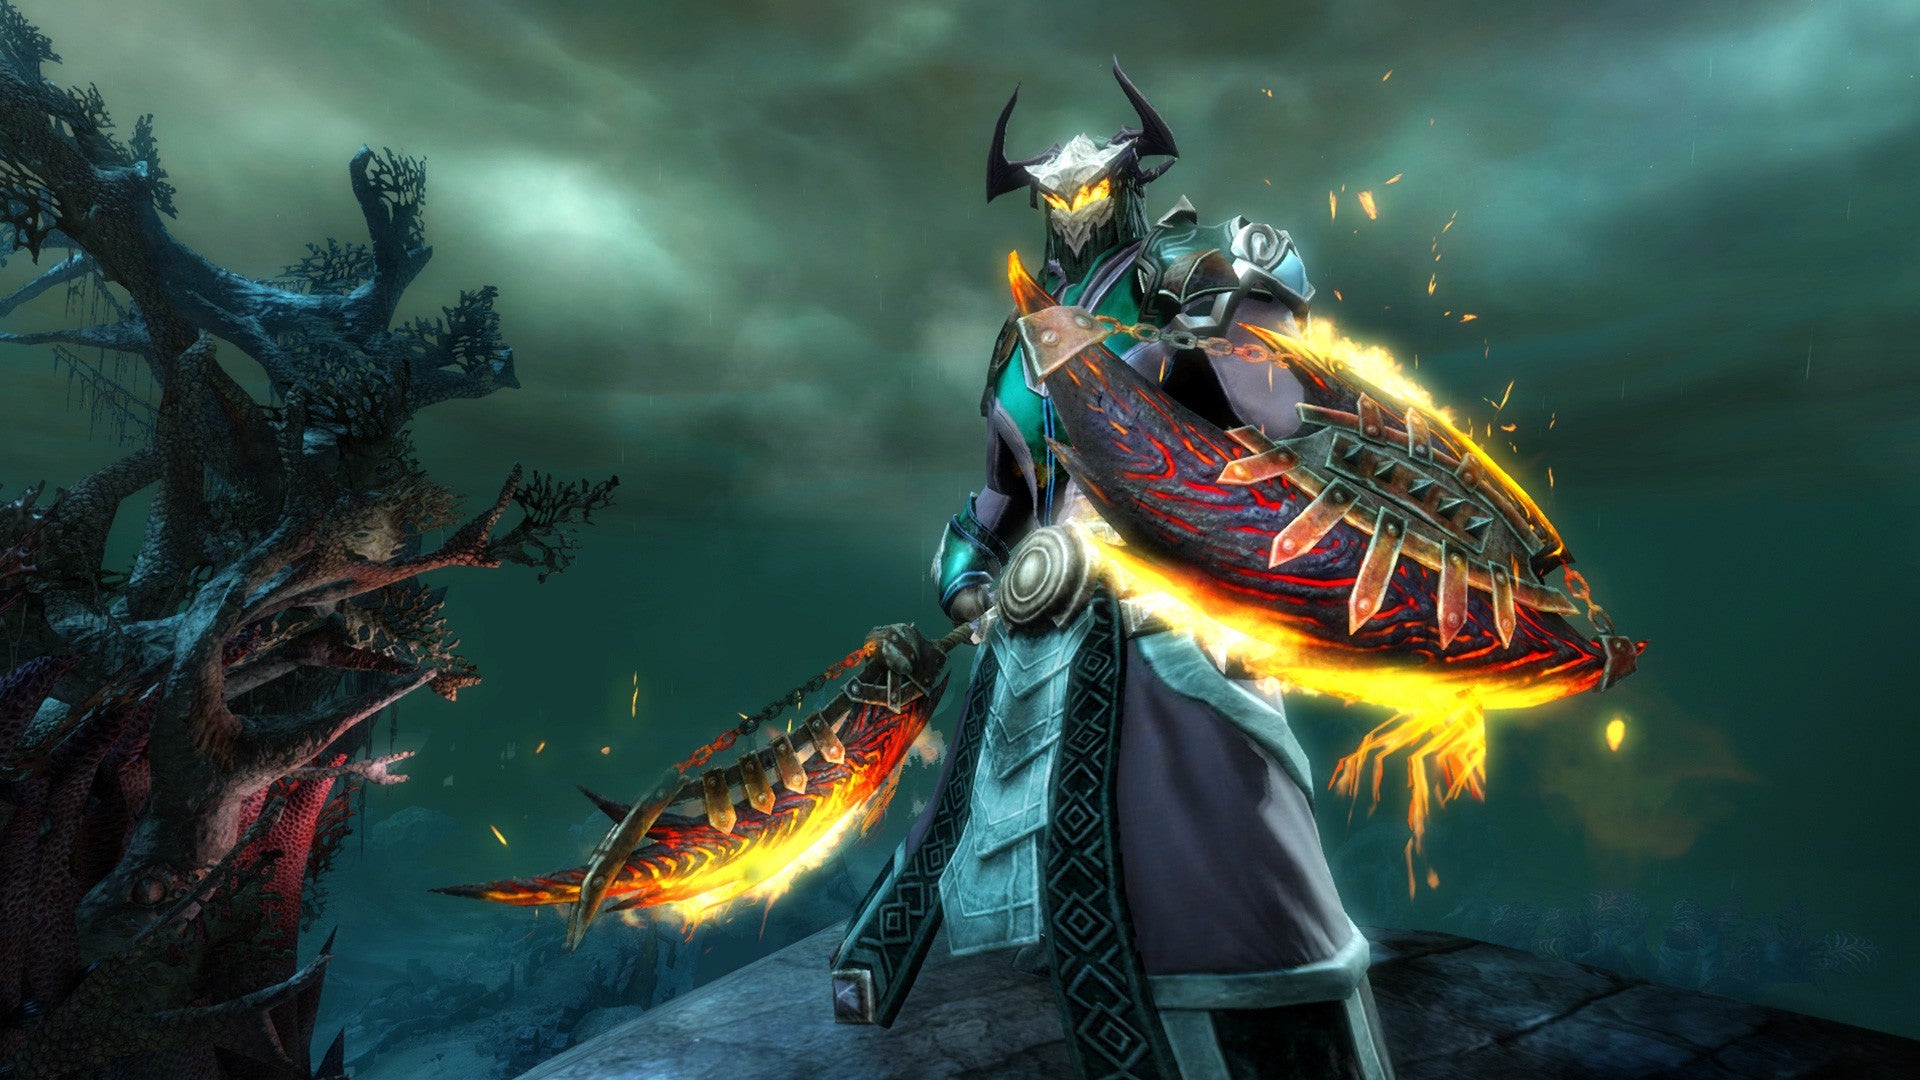 Long-running MMORPG Guild Wars 2 comes to Steam on August 23rd, 2022.